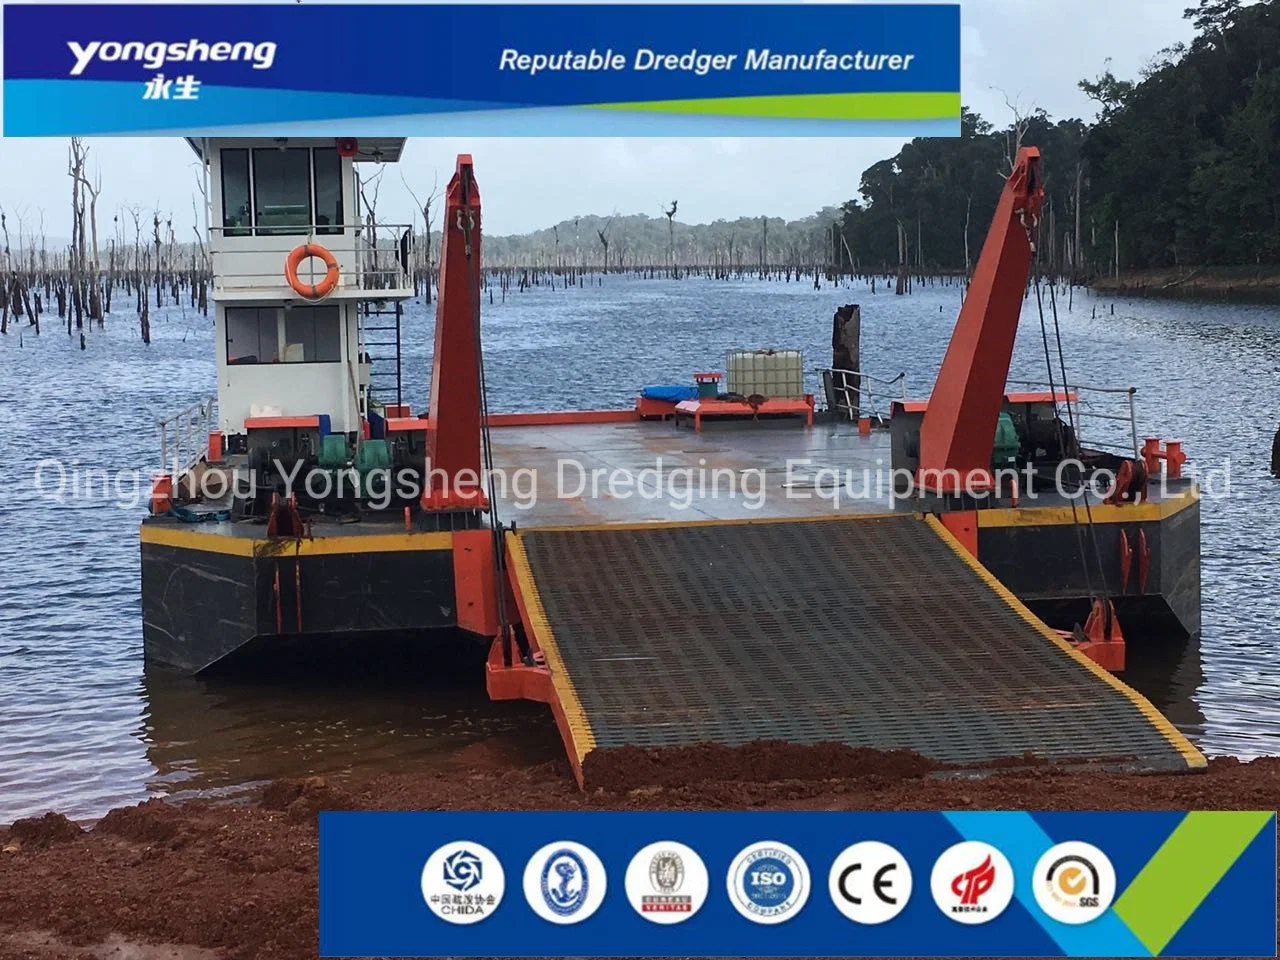 Ys Brand High Performance Logistic Barges Manufactured for Transporting Equipment/Containers/Cargos/Excavators for Sale